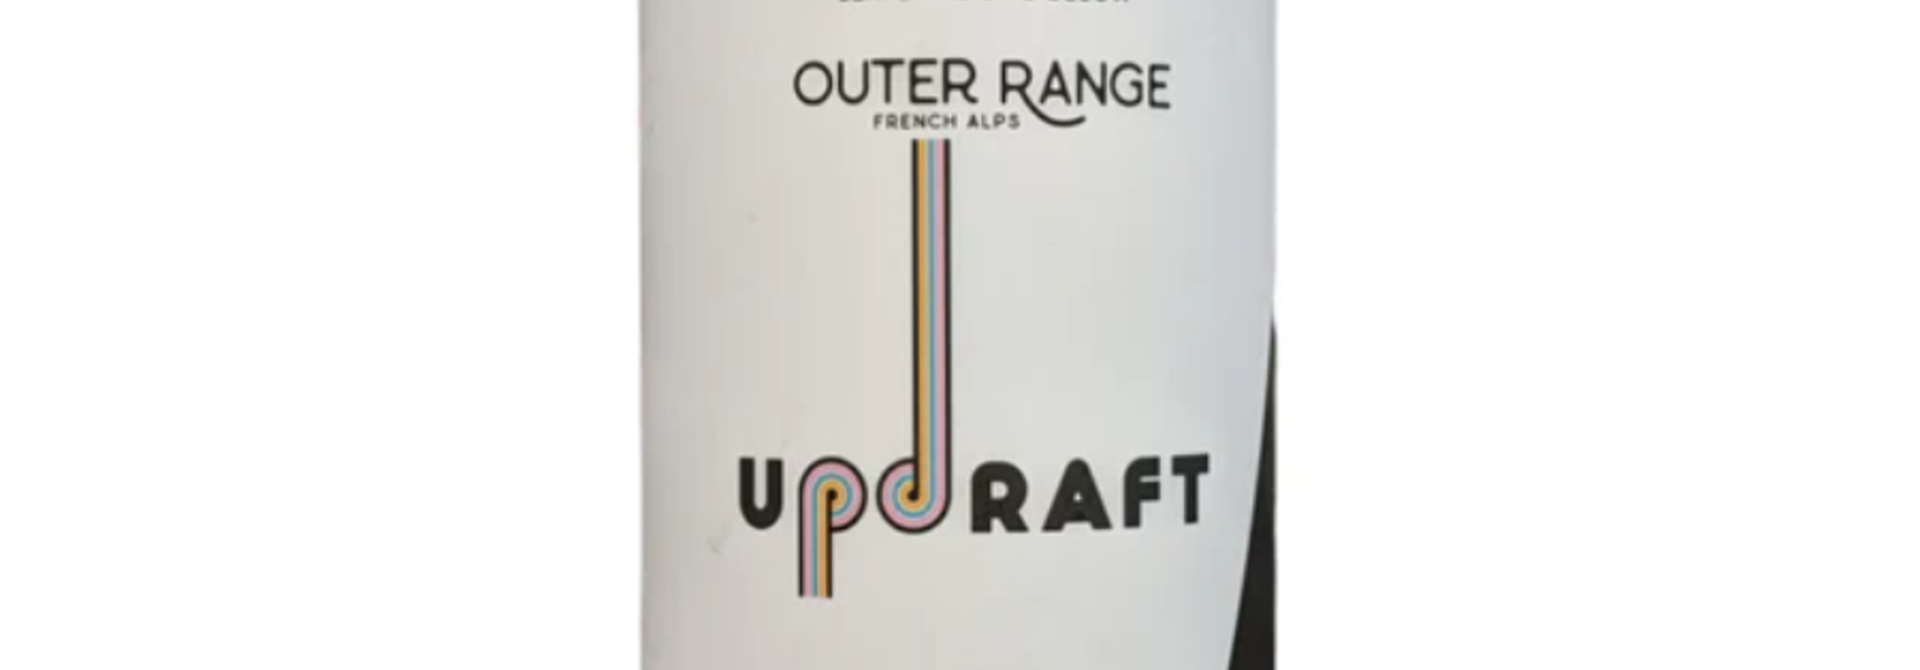 Outer Range French Alps Updraft 44CL 6%